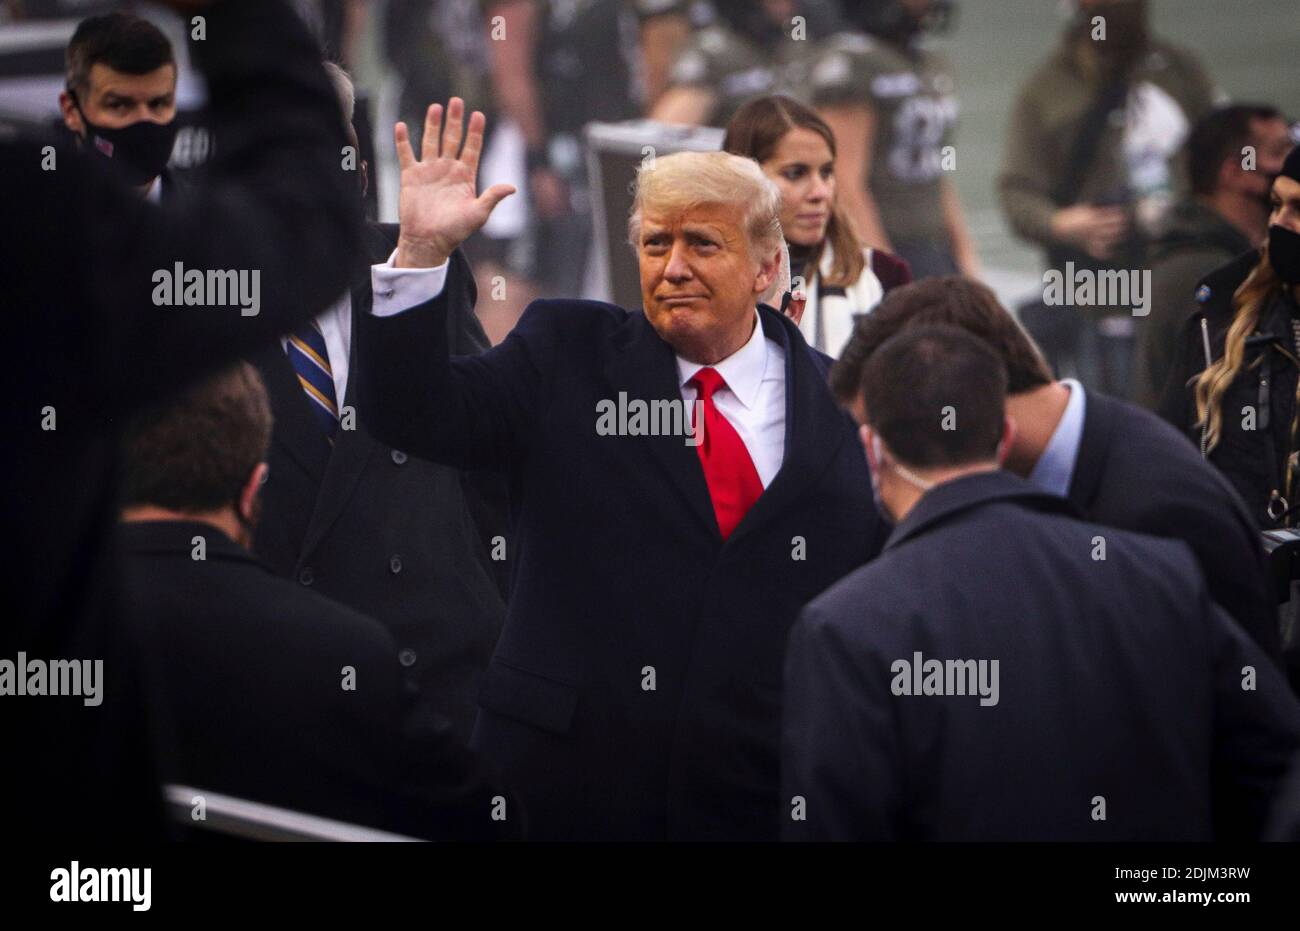 U.S. President Donald Trump waves as he arrives for the coin toss for the 121st Army-Navy football game at Michie Stadium December 12, 2019 in West Point, New York. The Army Black Knights shutout the Navy Midshipmen 15-0. Stock Photo